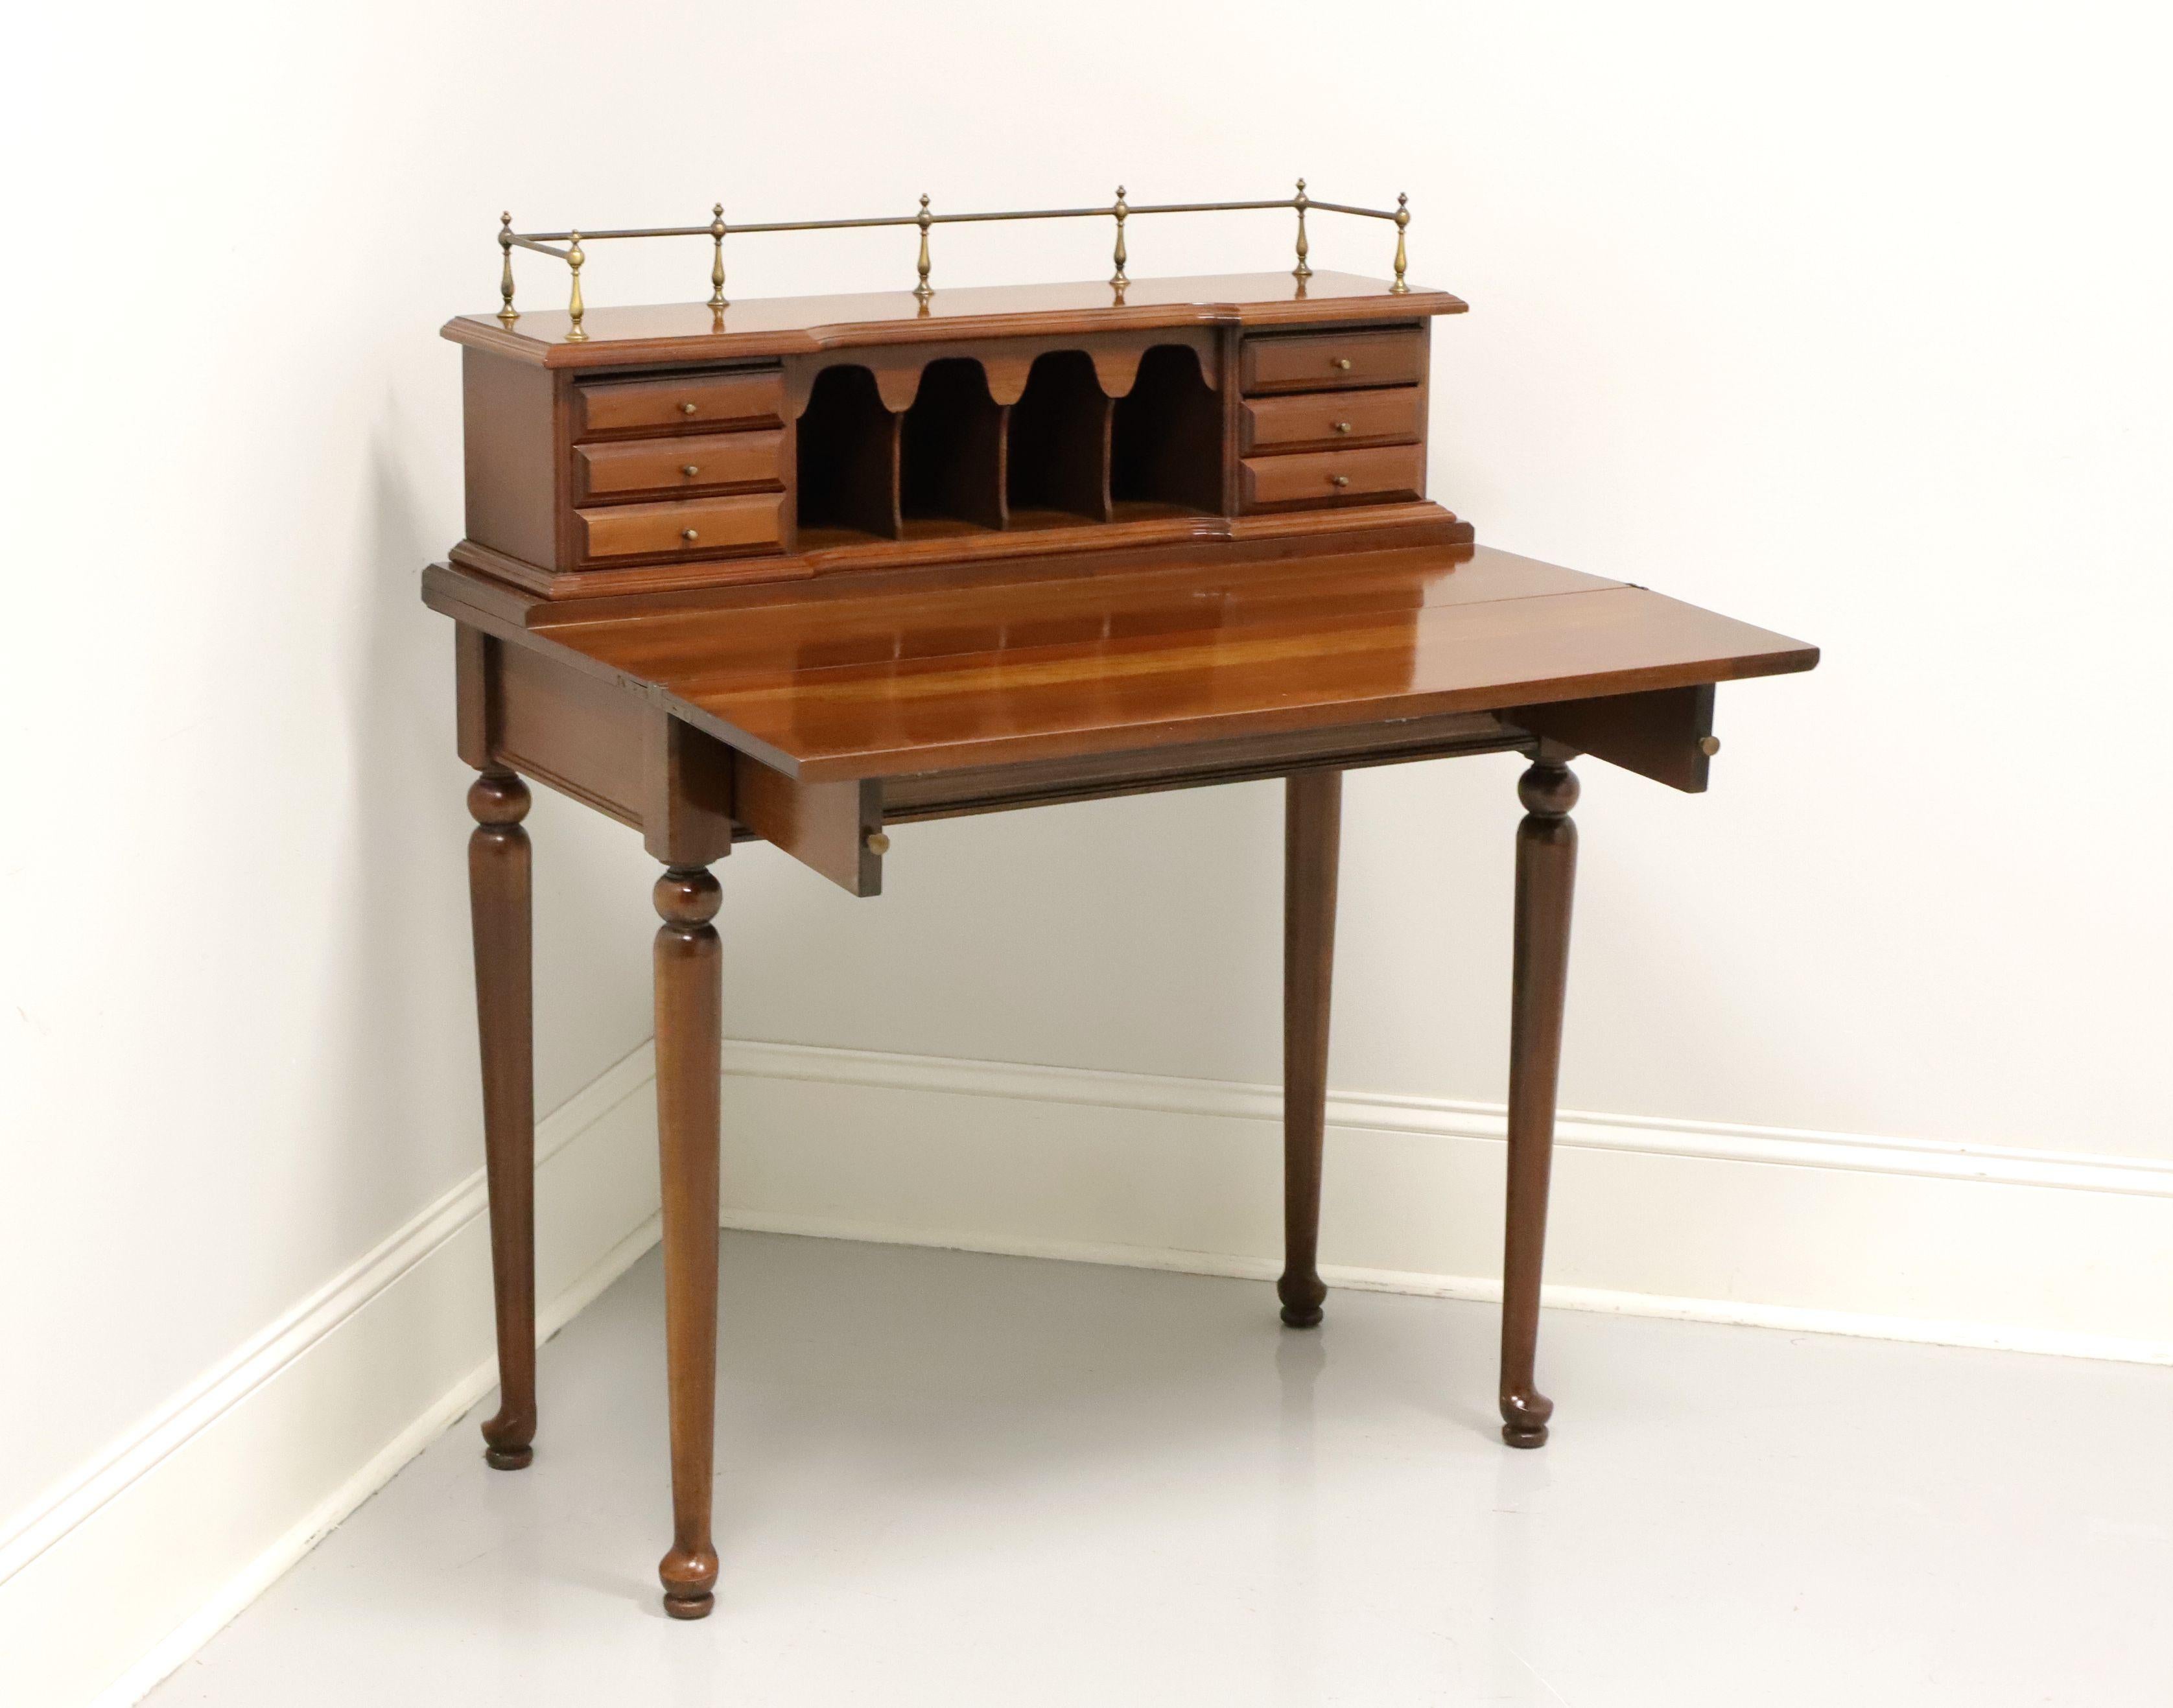 A Chippendale style petite writing desk by Willett Furniture, of Louisville, Kentucky, USA. Solid cherry with brass hardware & gallery, round legs and pad feet. Features an upper area of six smaller drawers & four cubbies with gallery atop, fold out